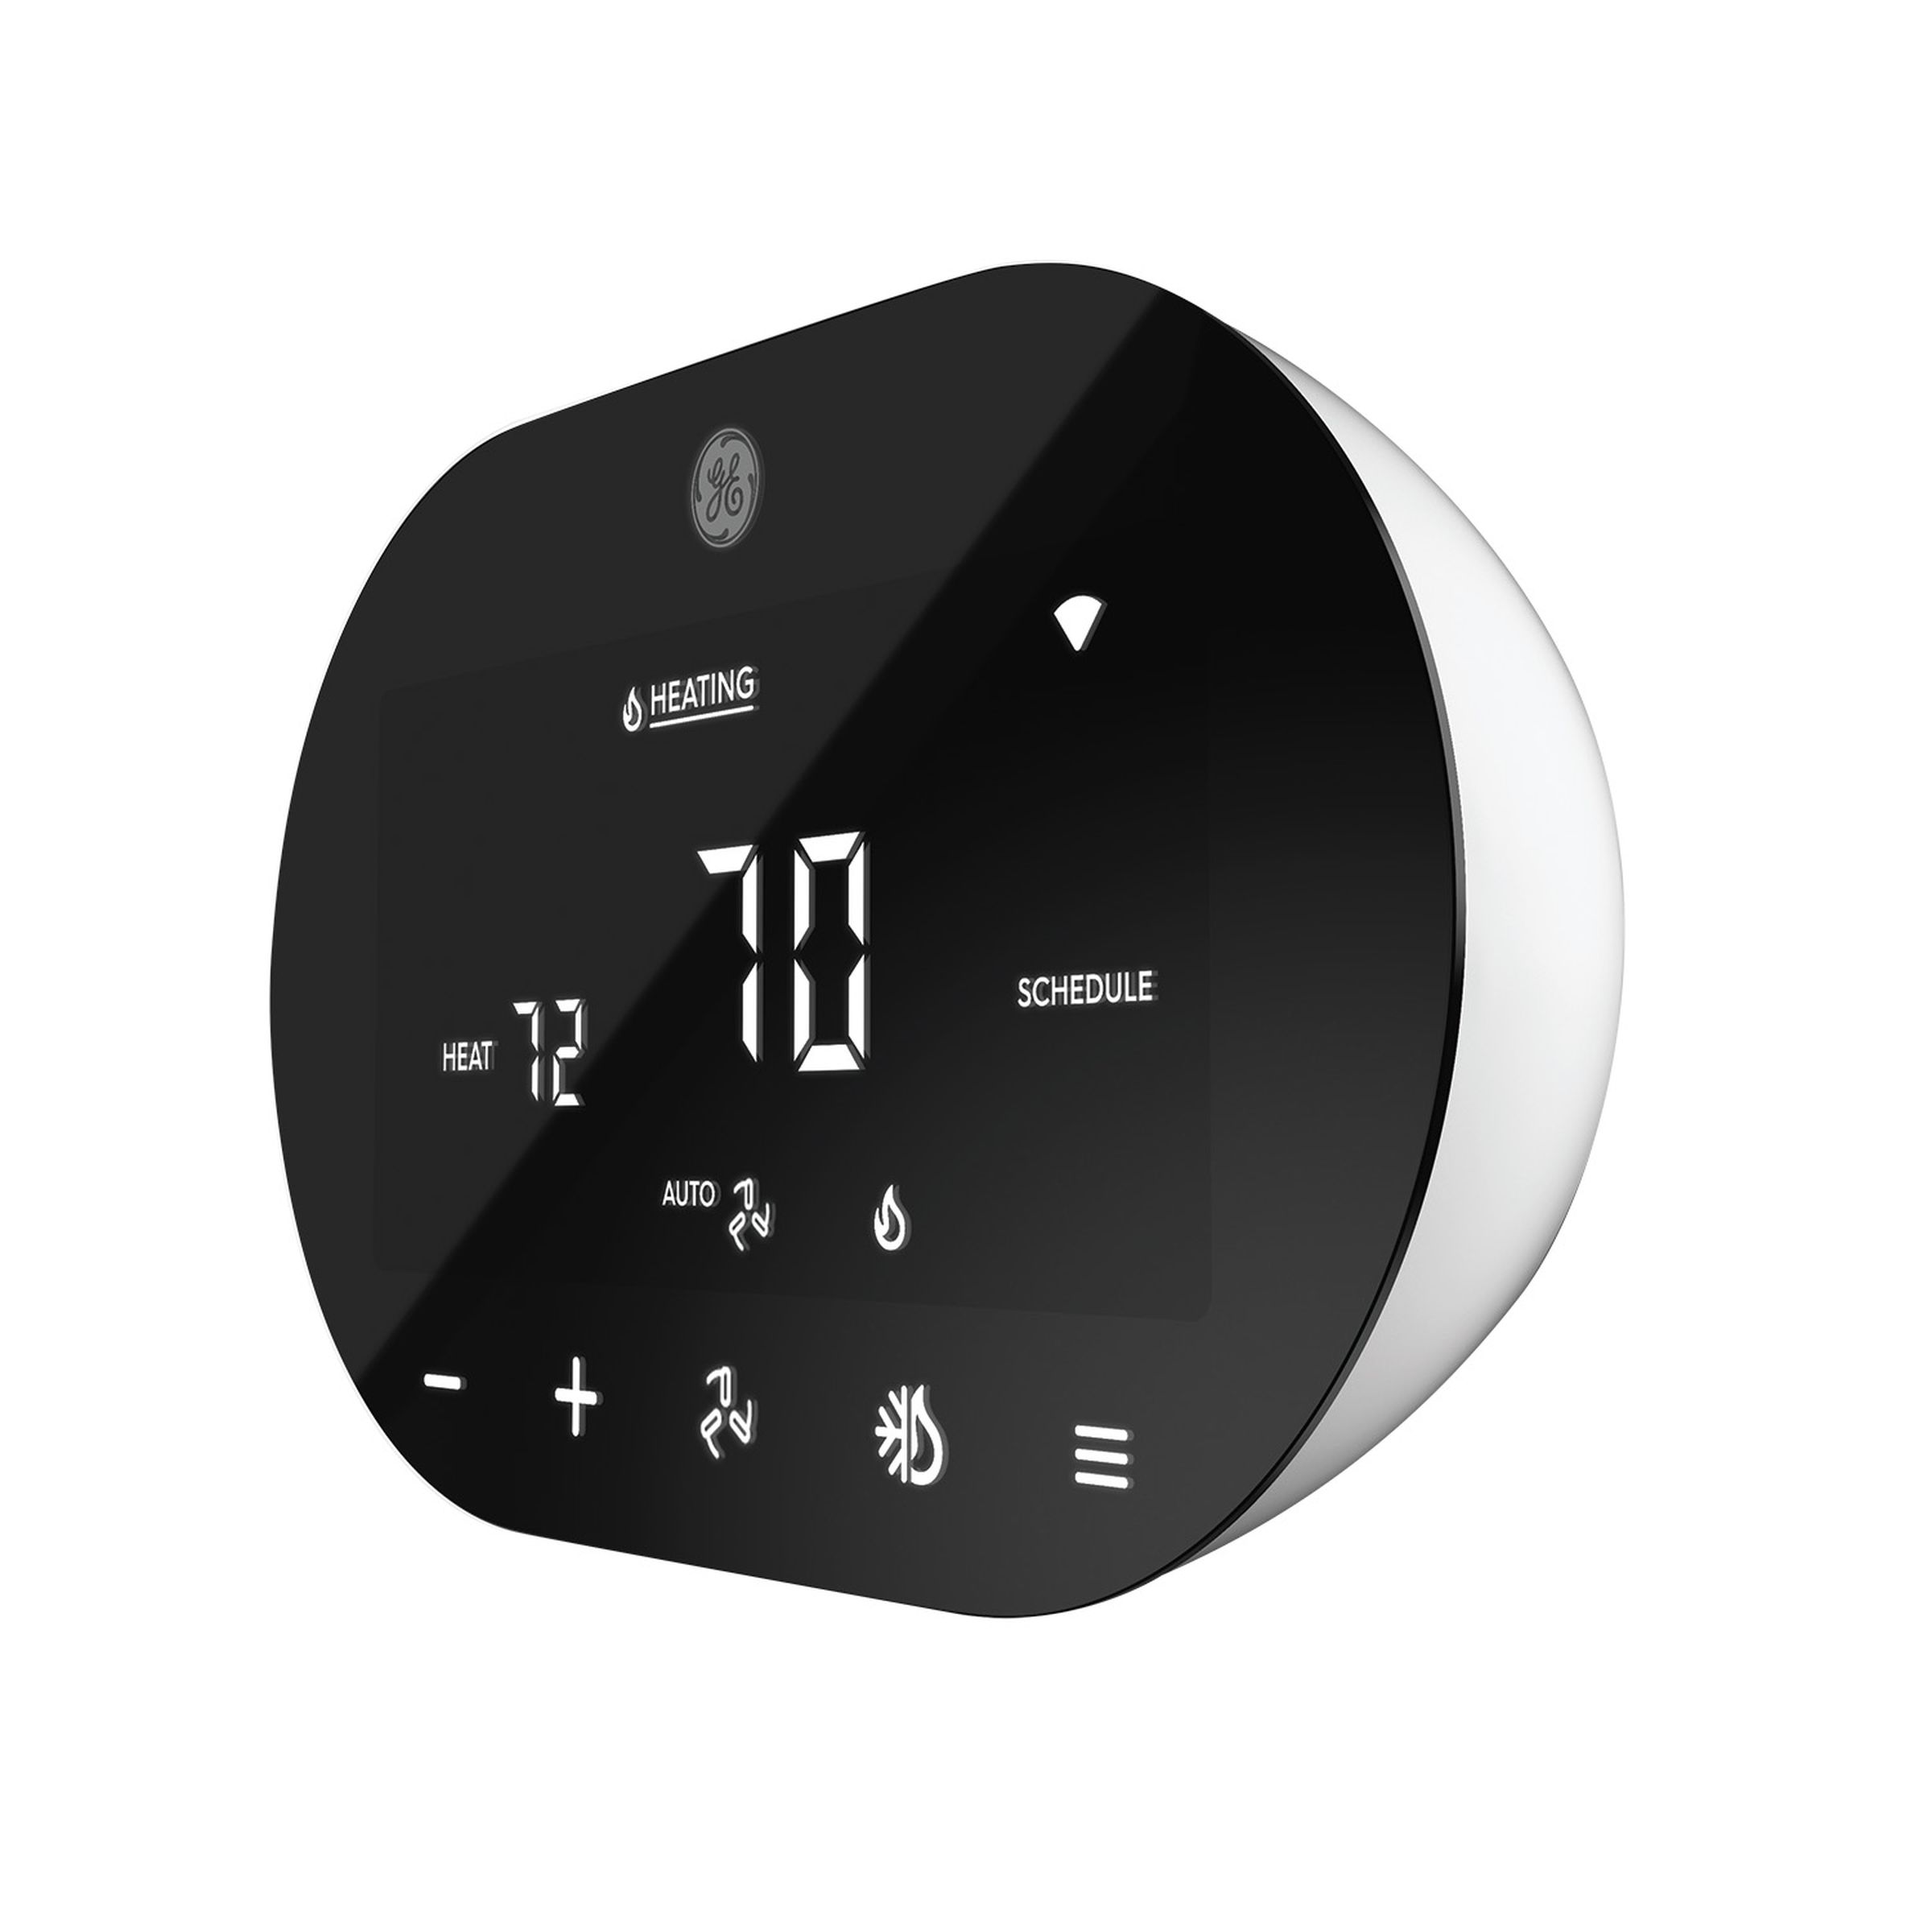 Cync’s new smart thermostat works with remote room sensors.